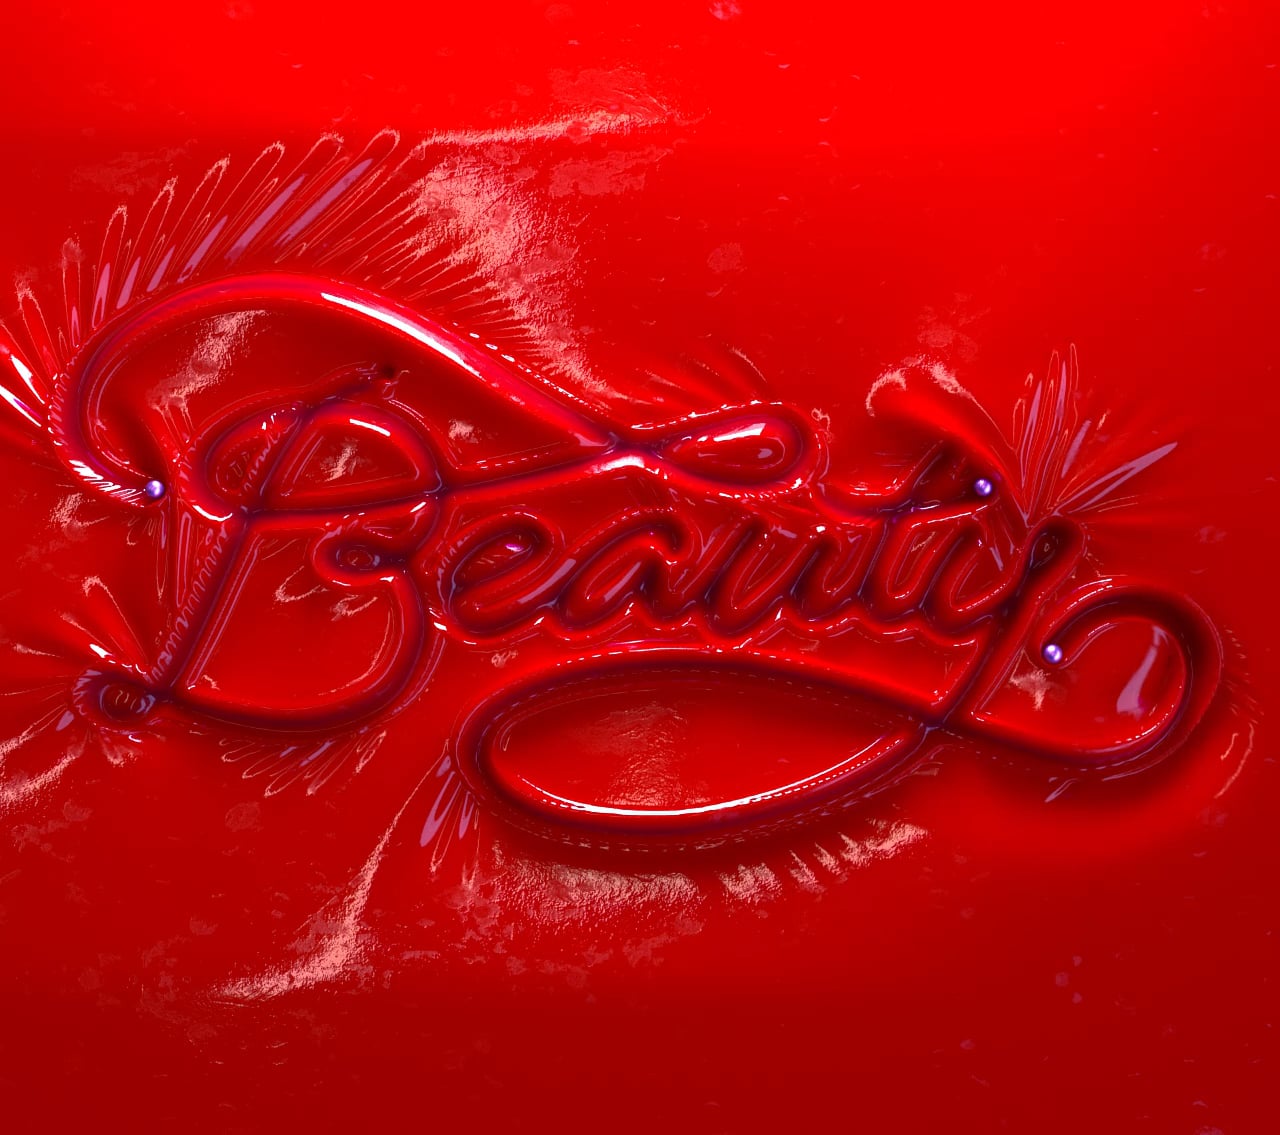 Beauty (Red Version)